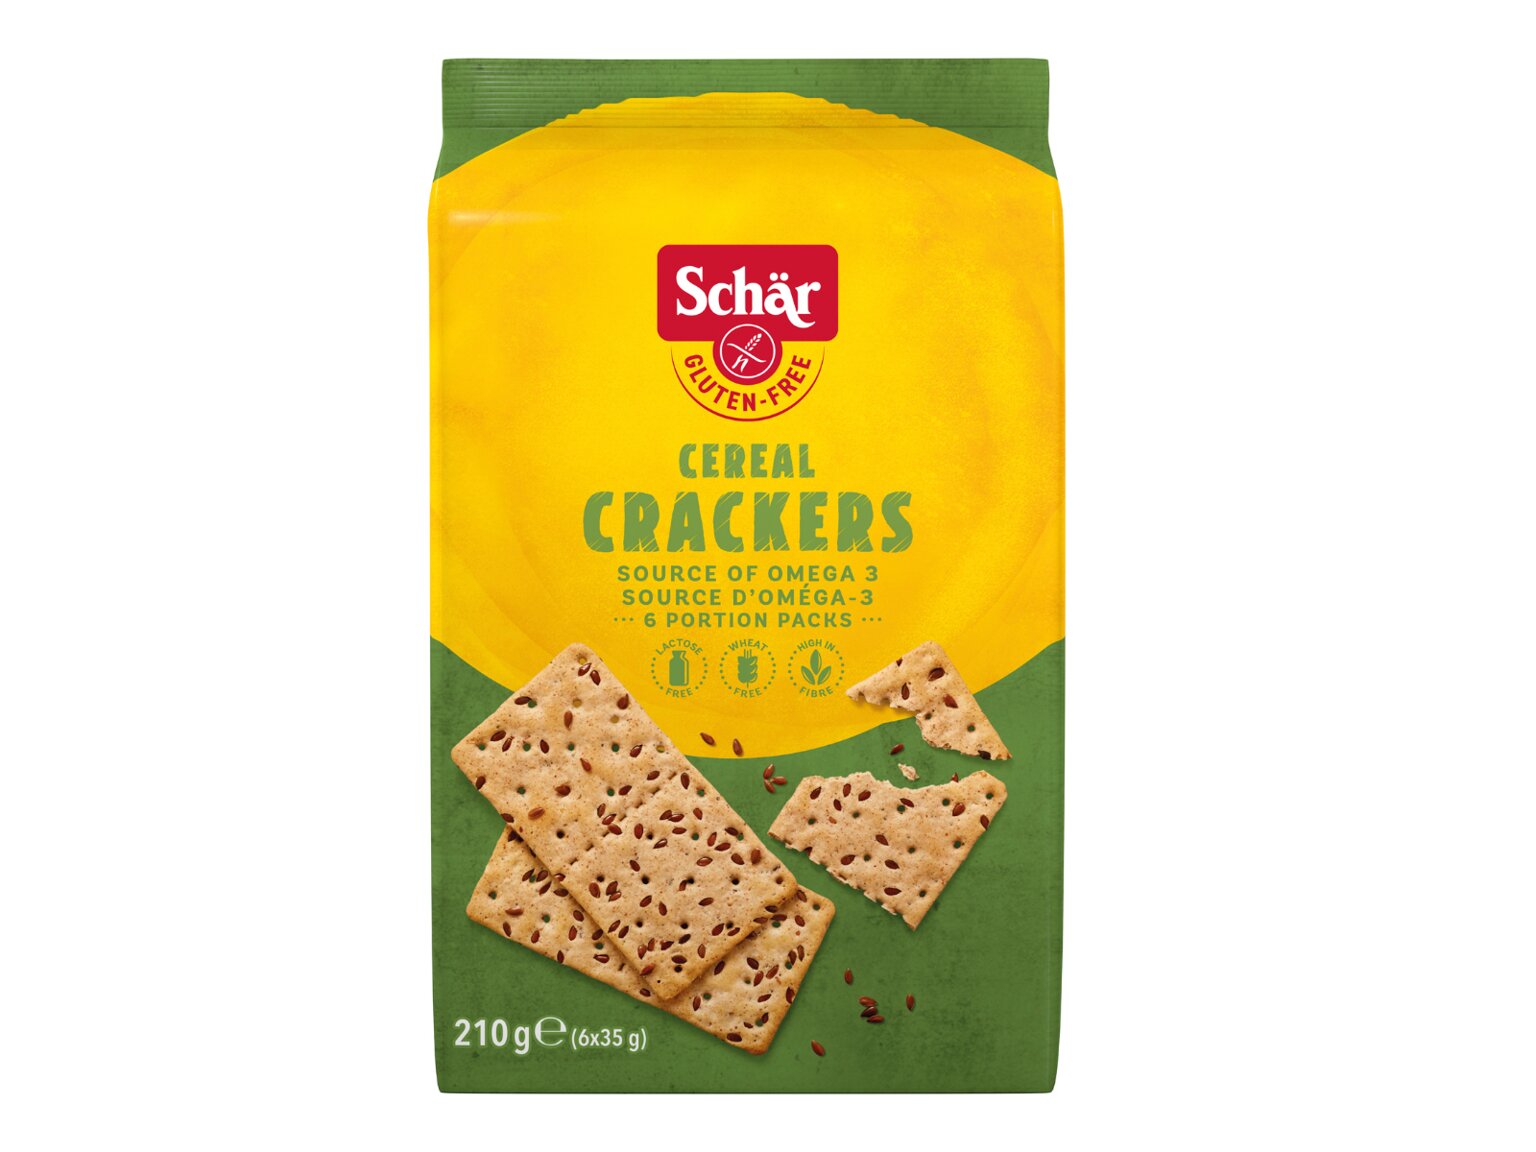 CEREAL CRACKERS